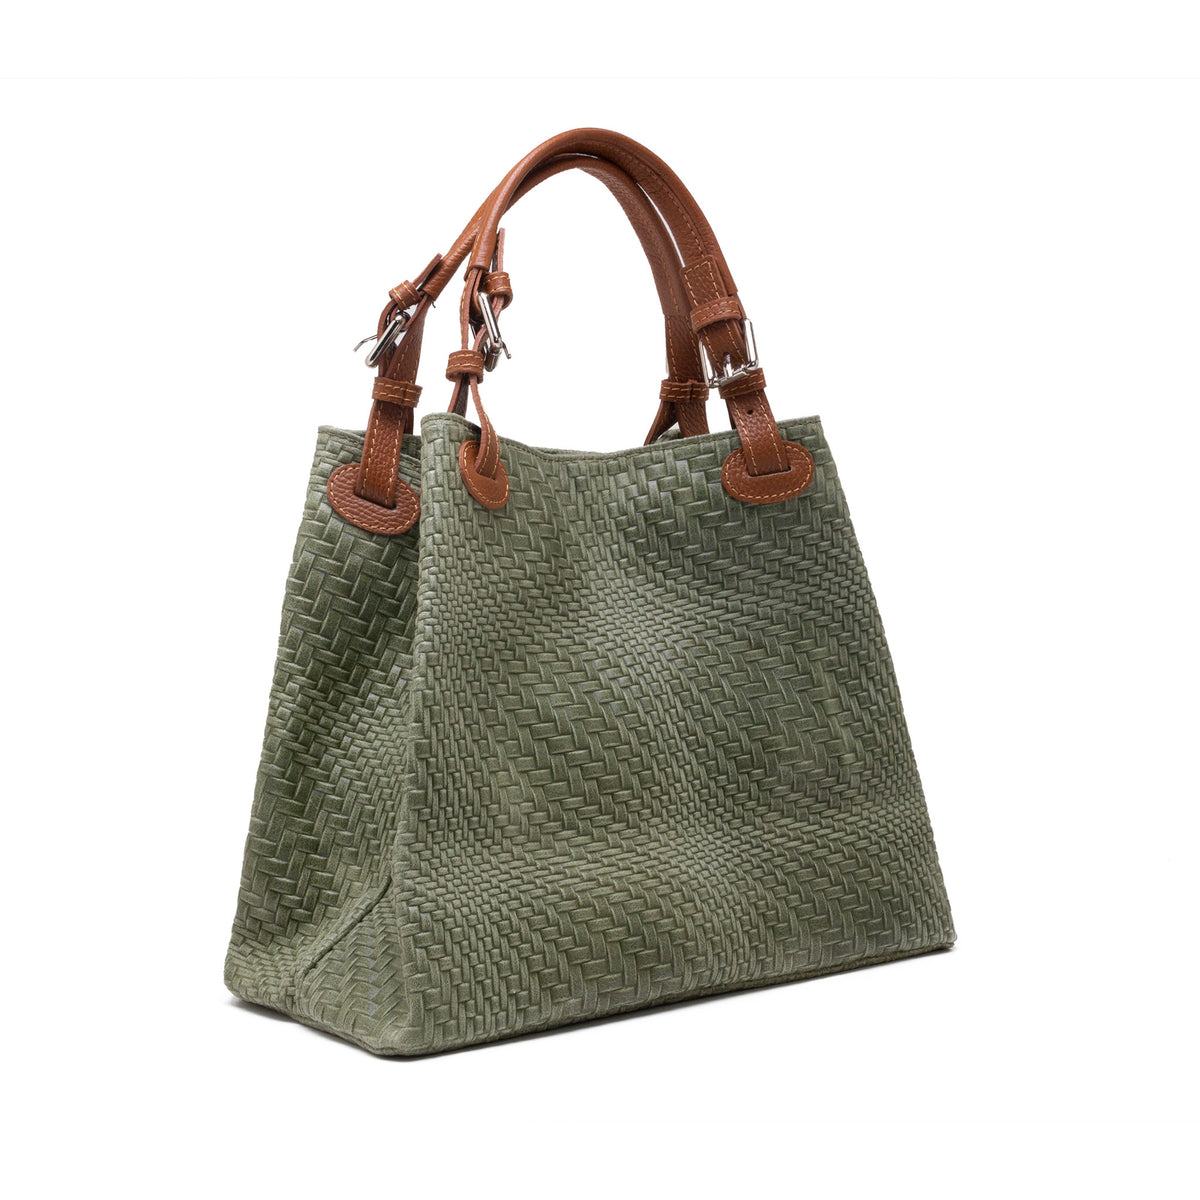 alannis_tote_bag_military_hover